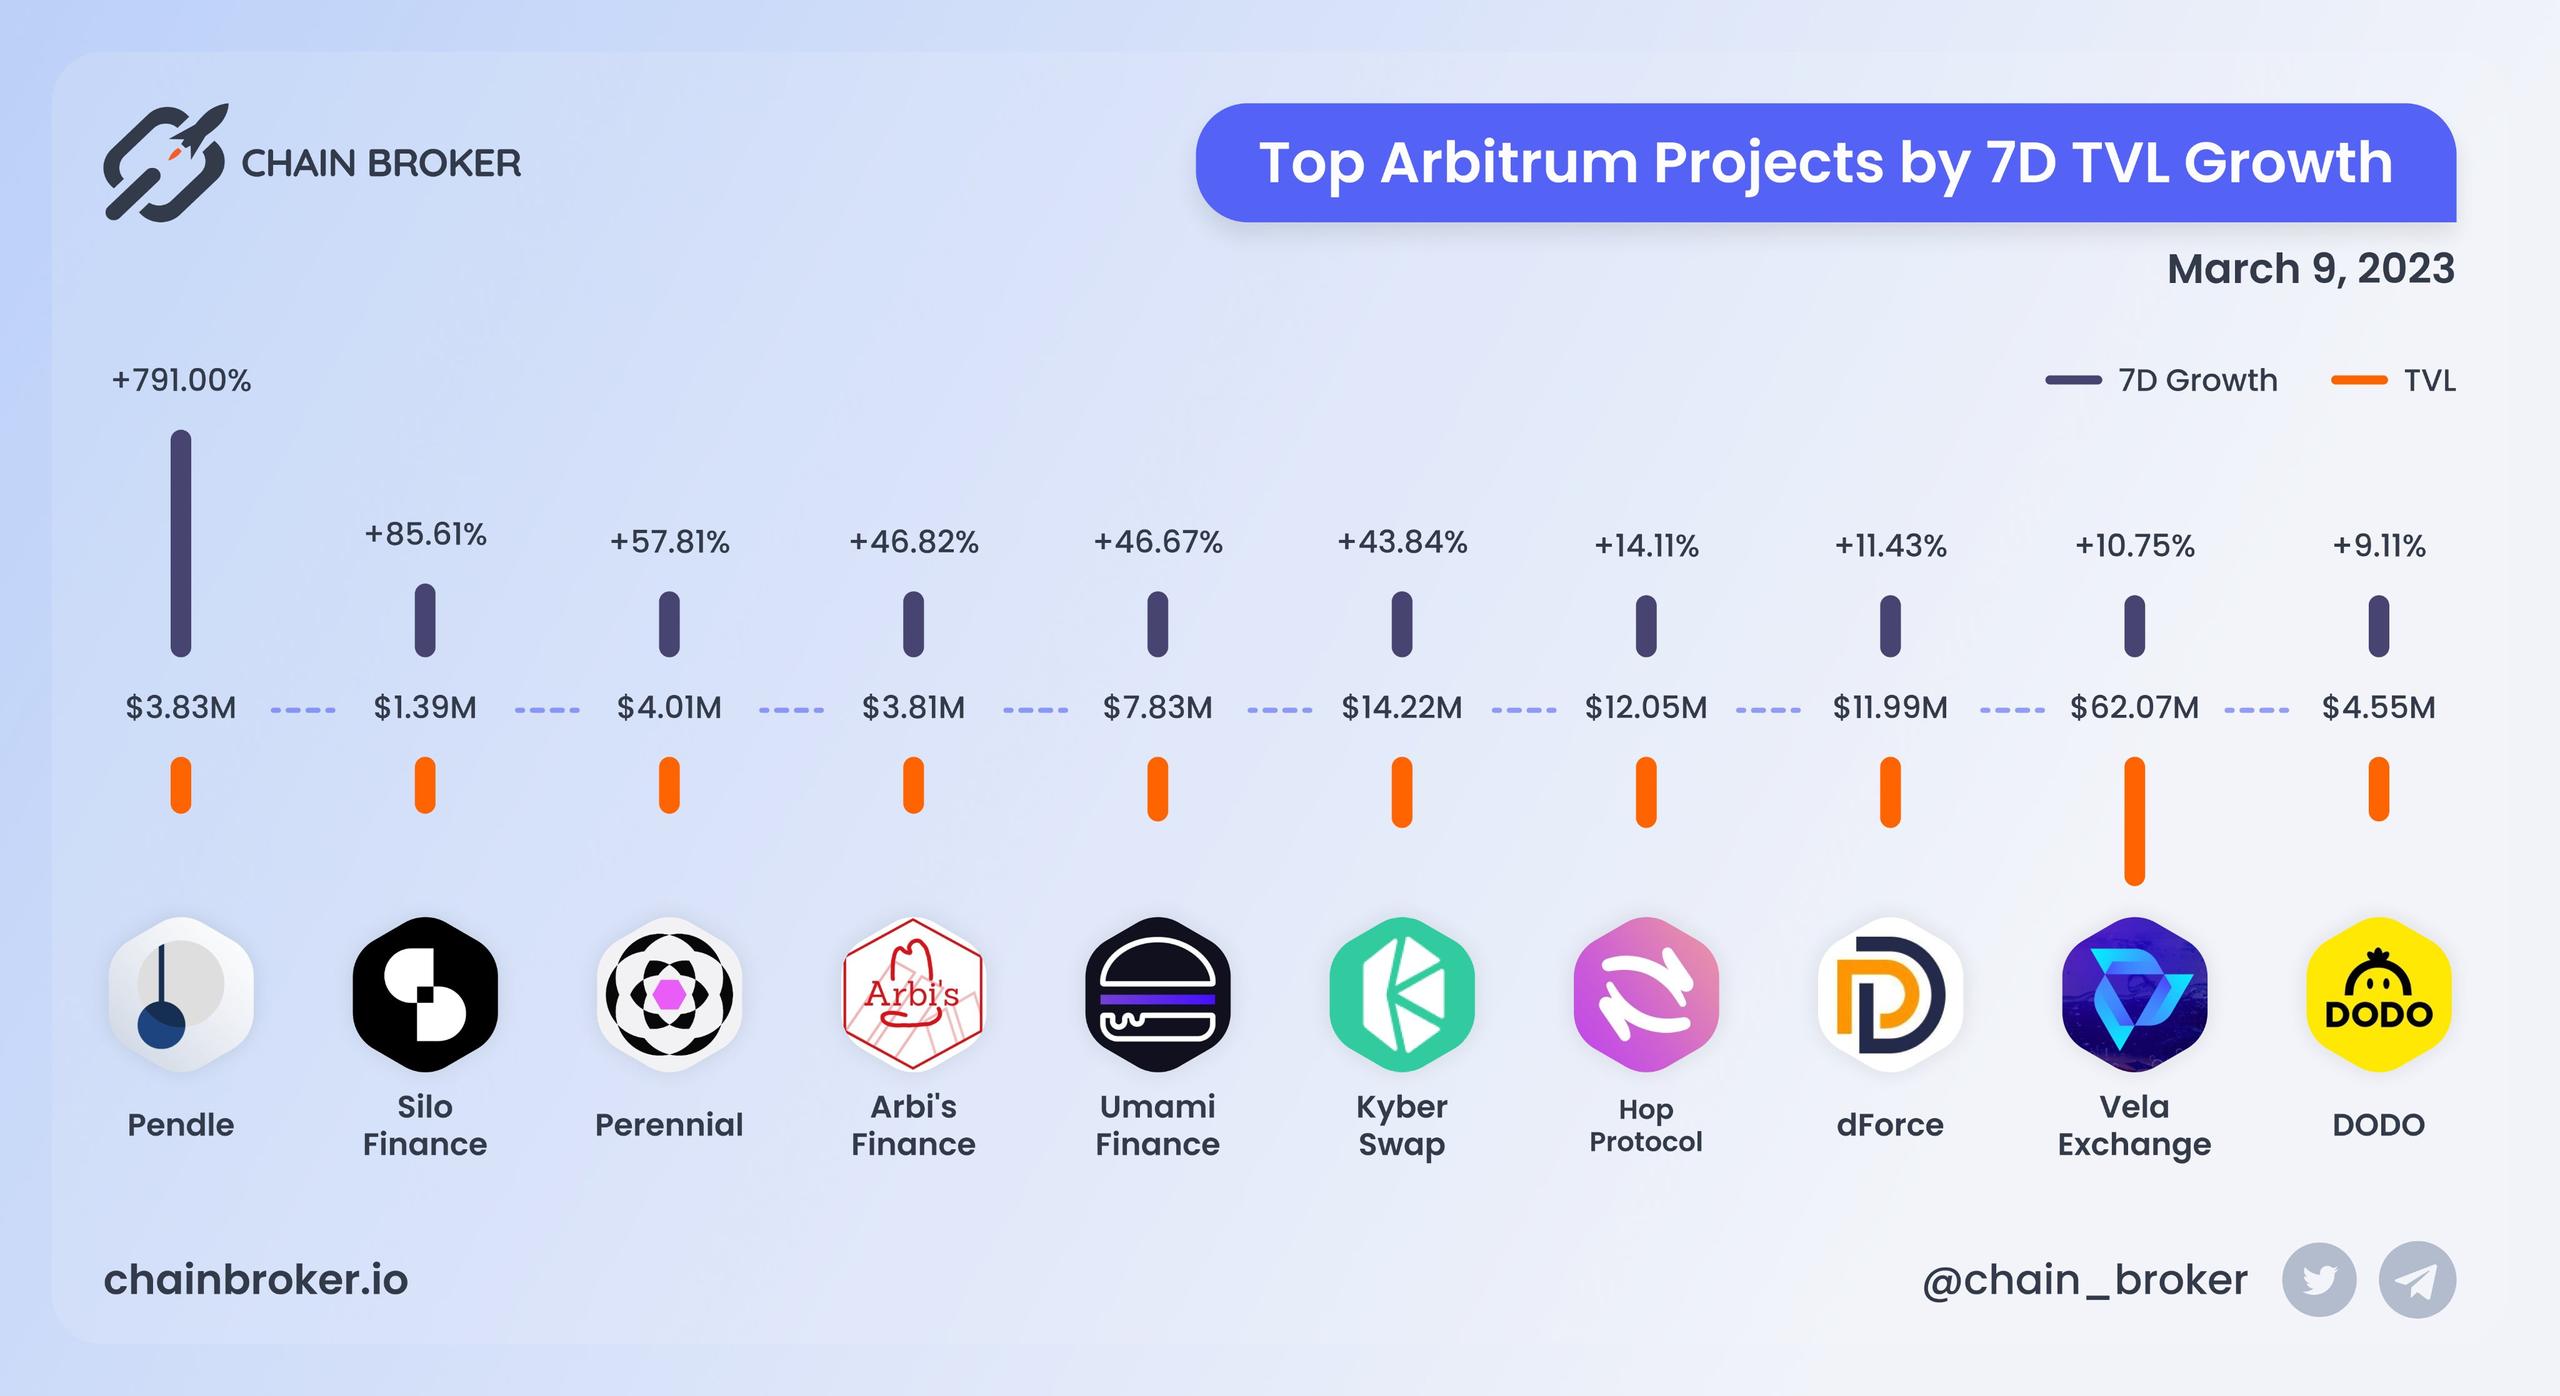 Top Arbitrum projects by 7D TVL growth